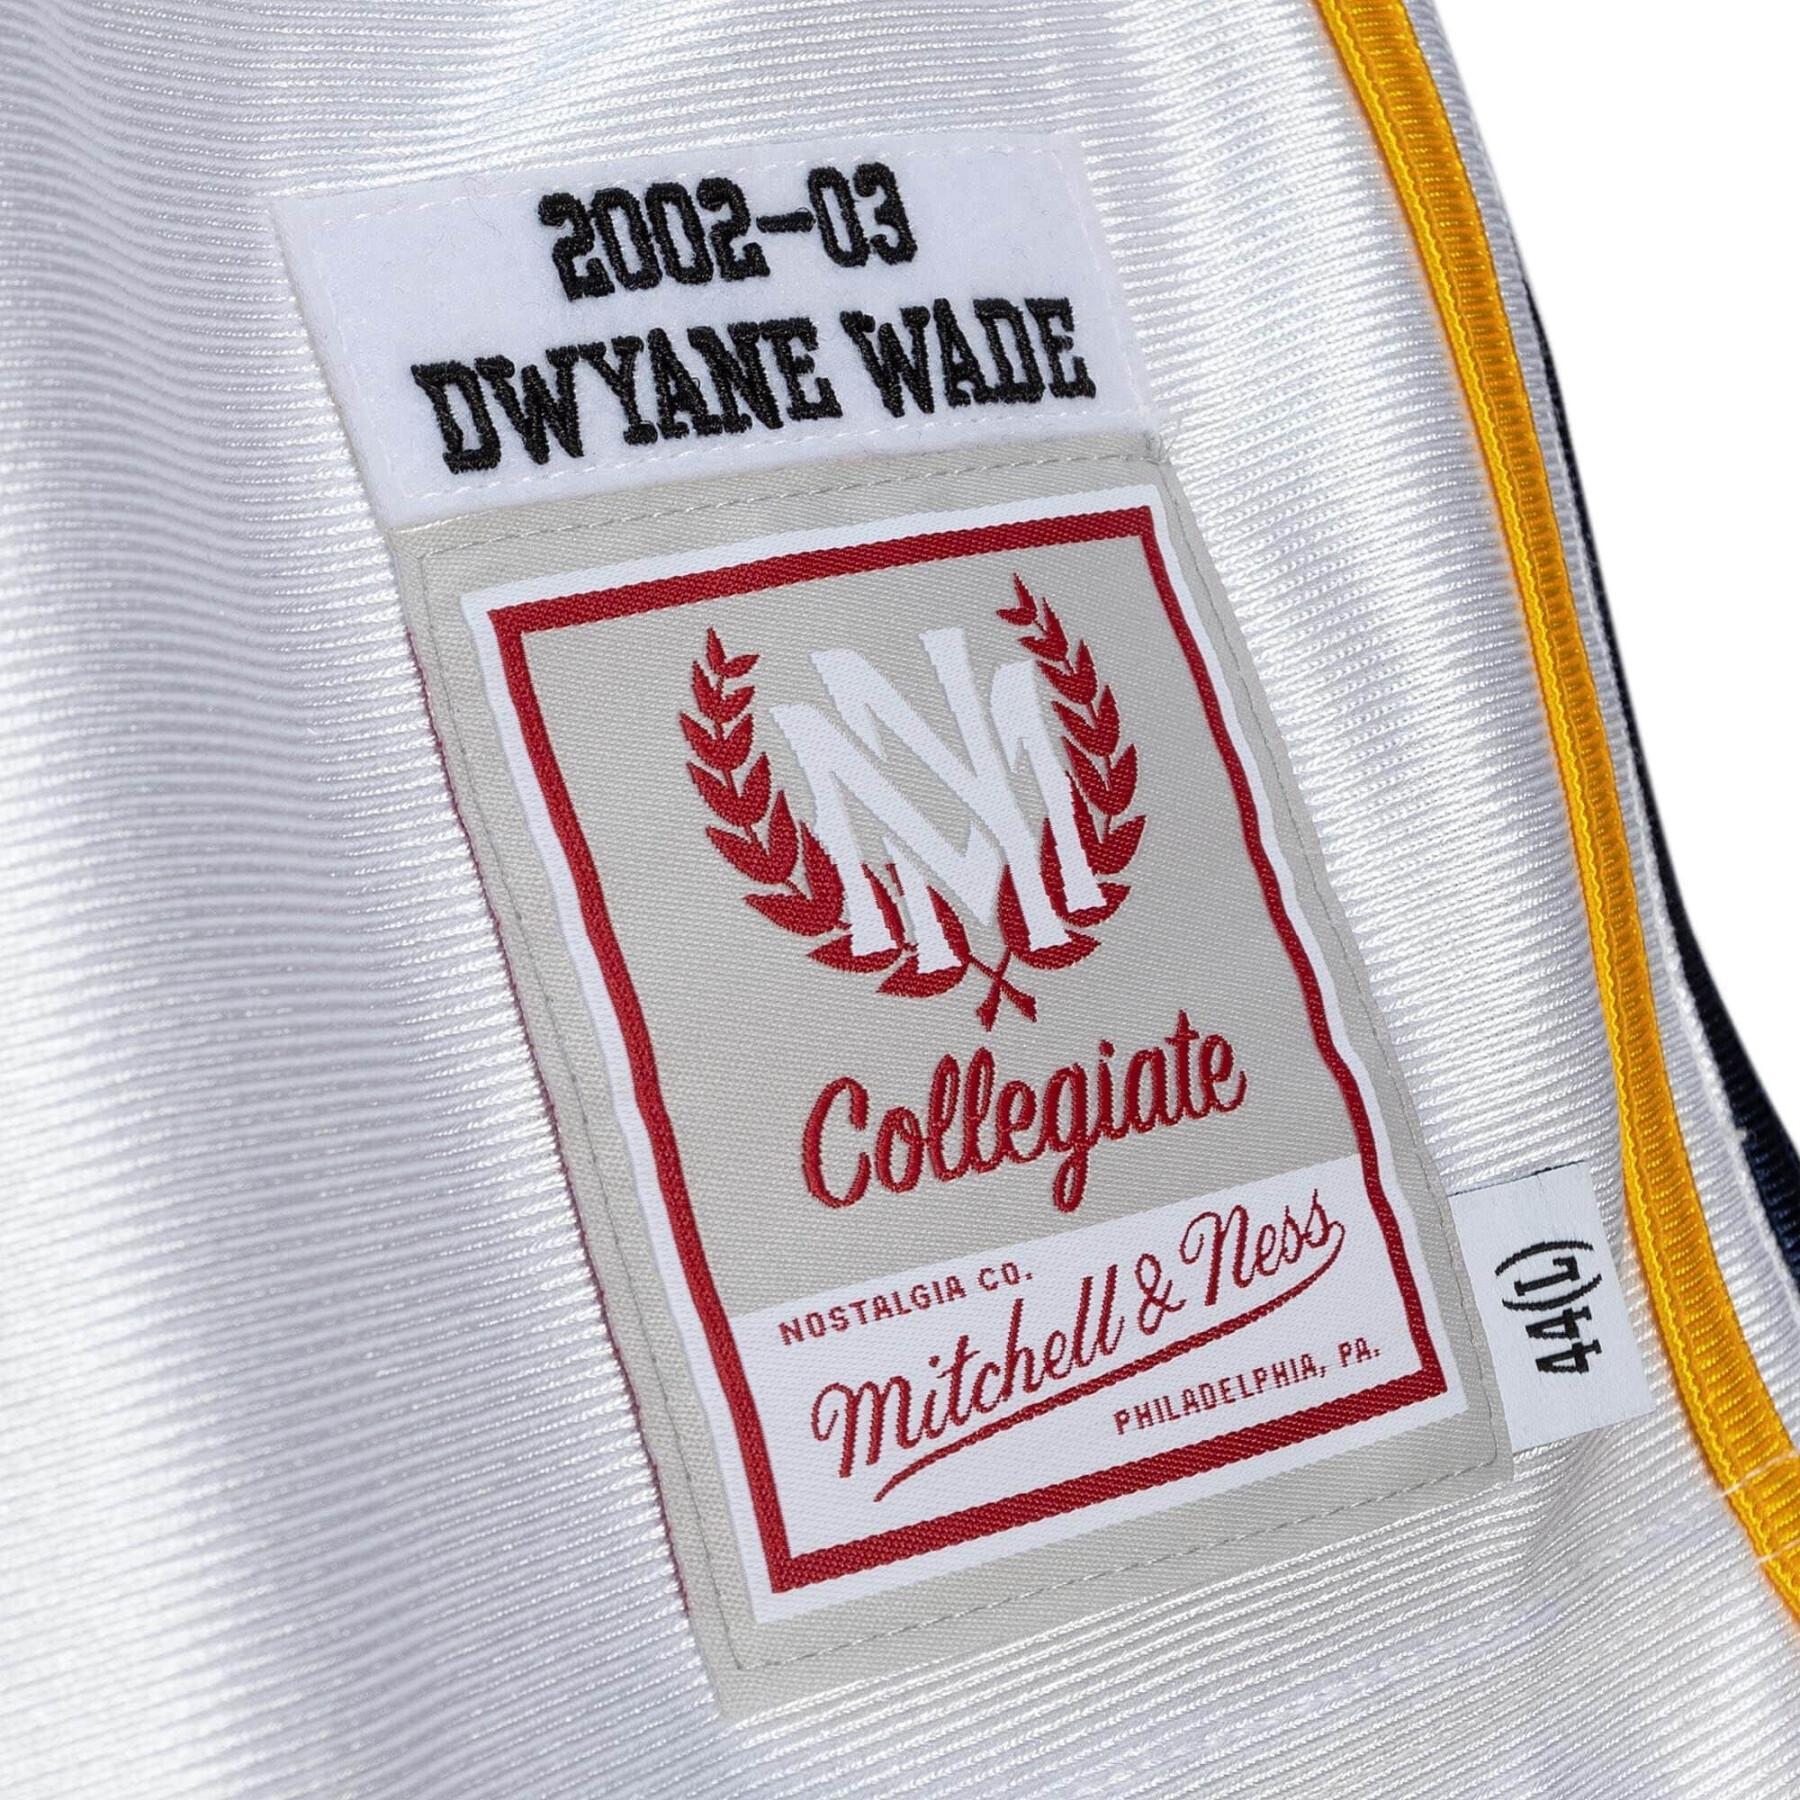 Maillot Marquette University NCAA 2002 Dwyane Wade